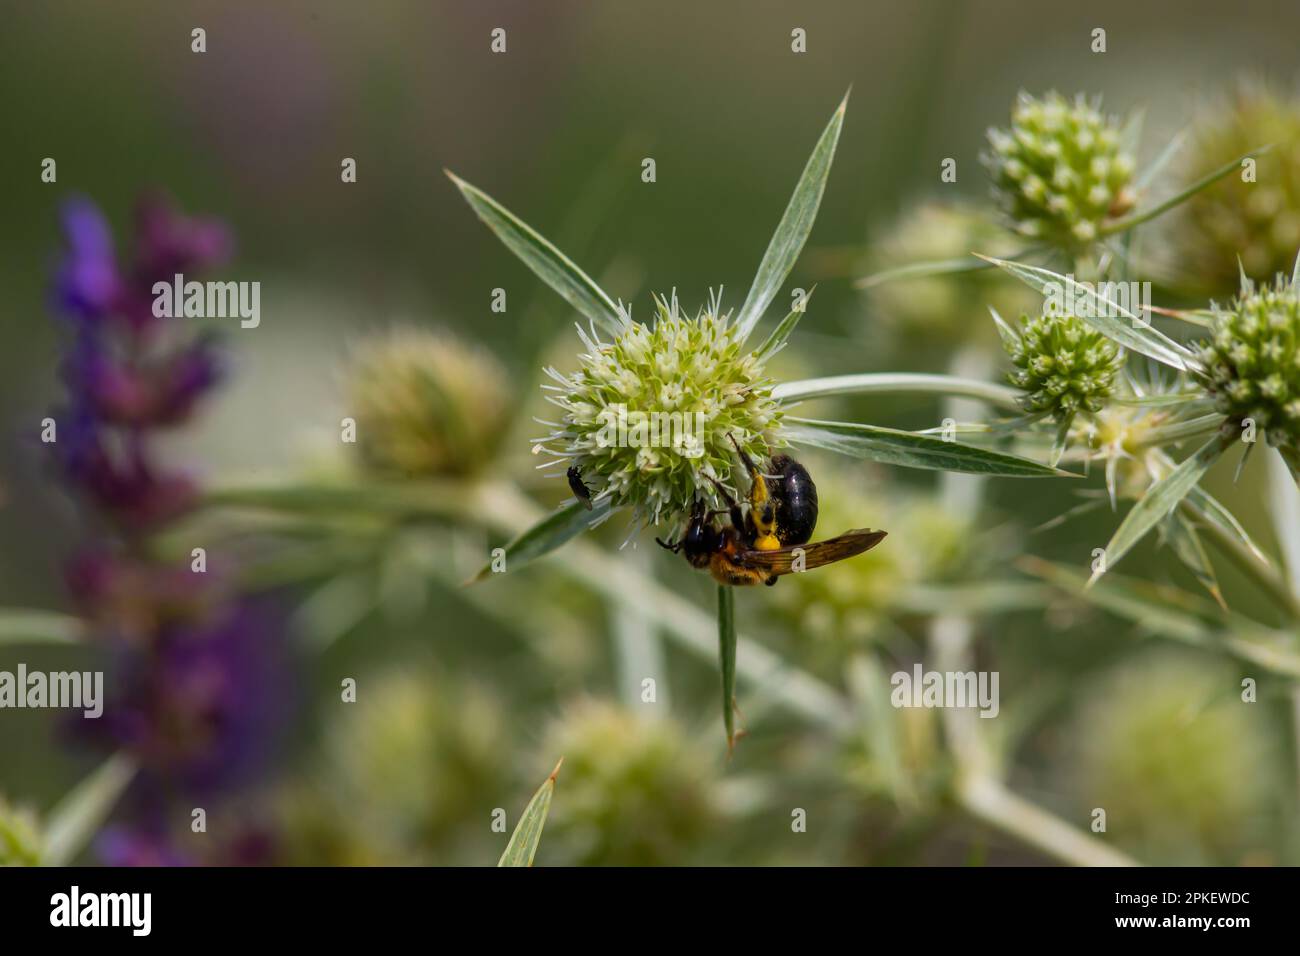 Bee on flowers of eryngium. Bee pollinates a flower in the garden. Stock Photo